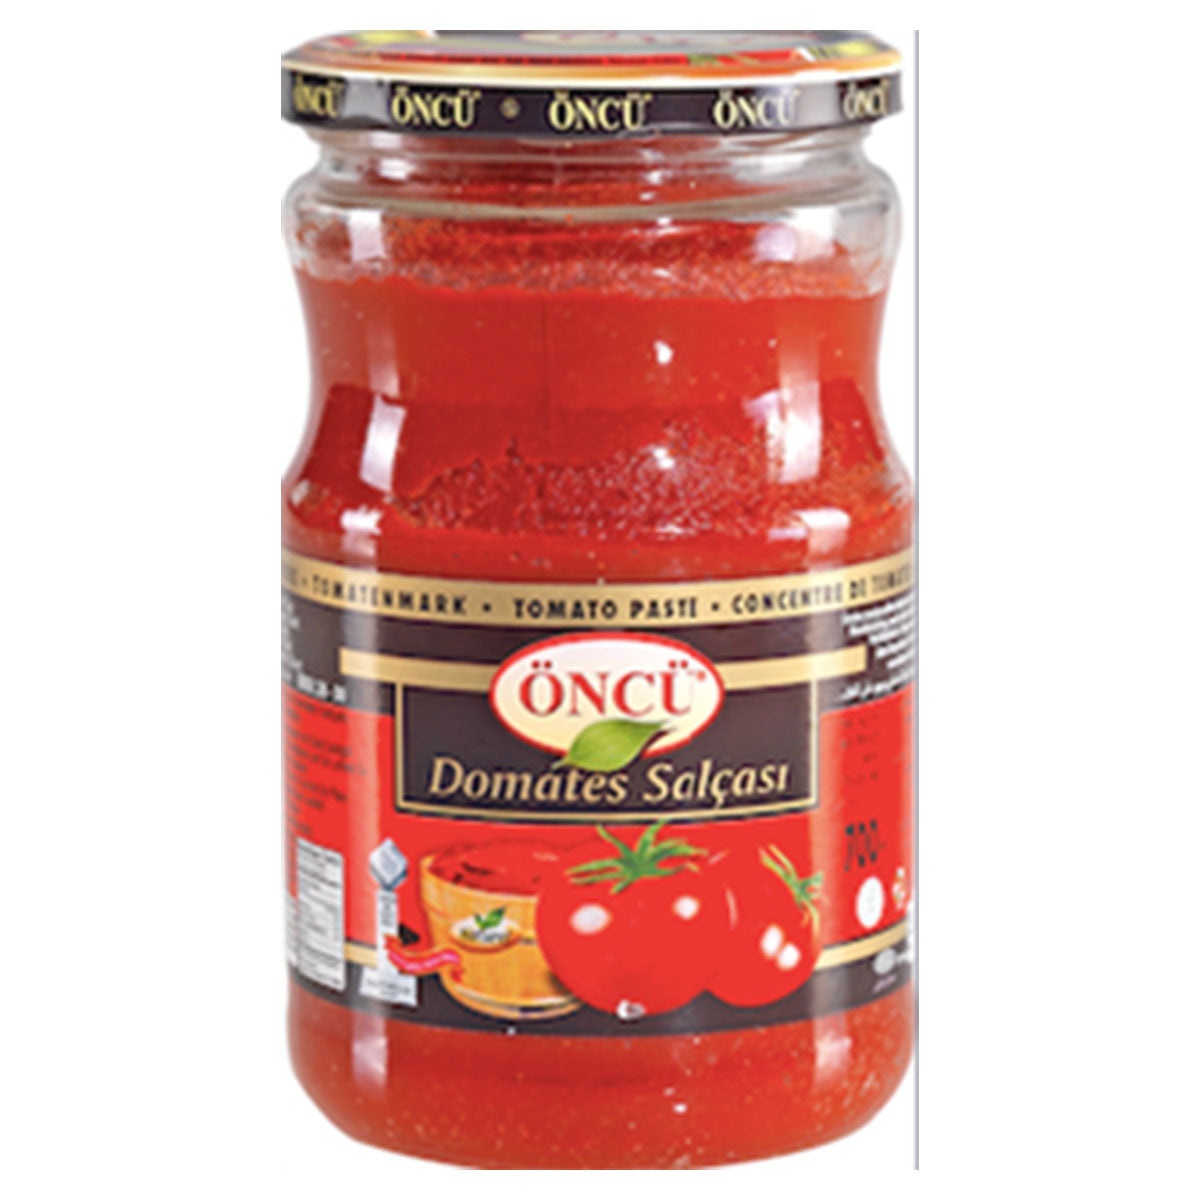 Oncu - Tomato Paste Glass - 700g - Continental Food Store